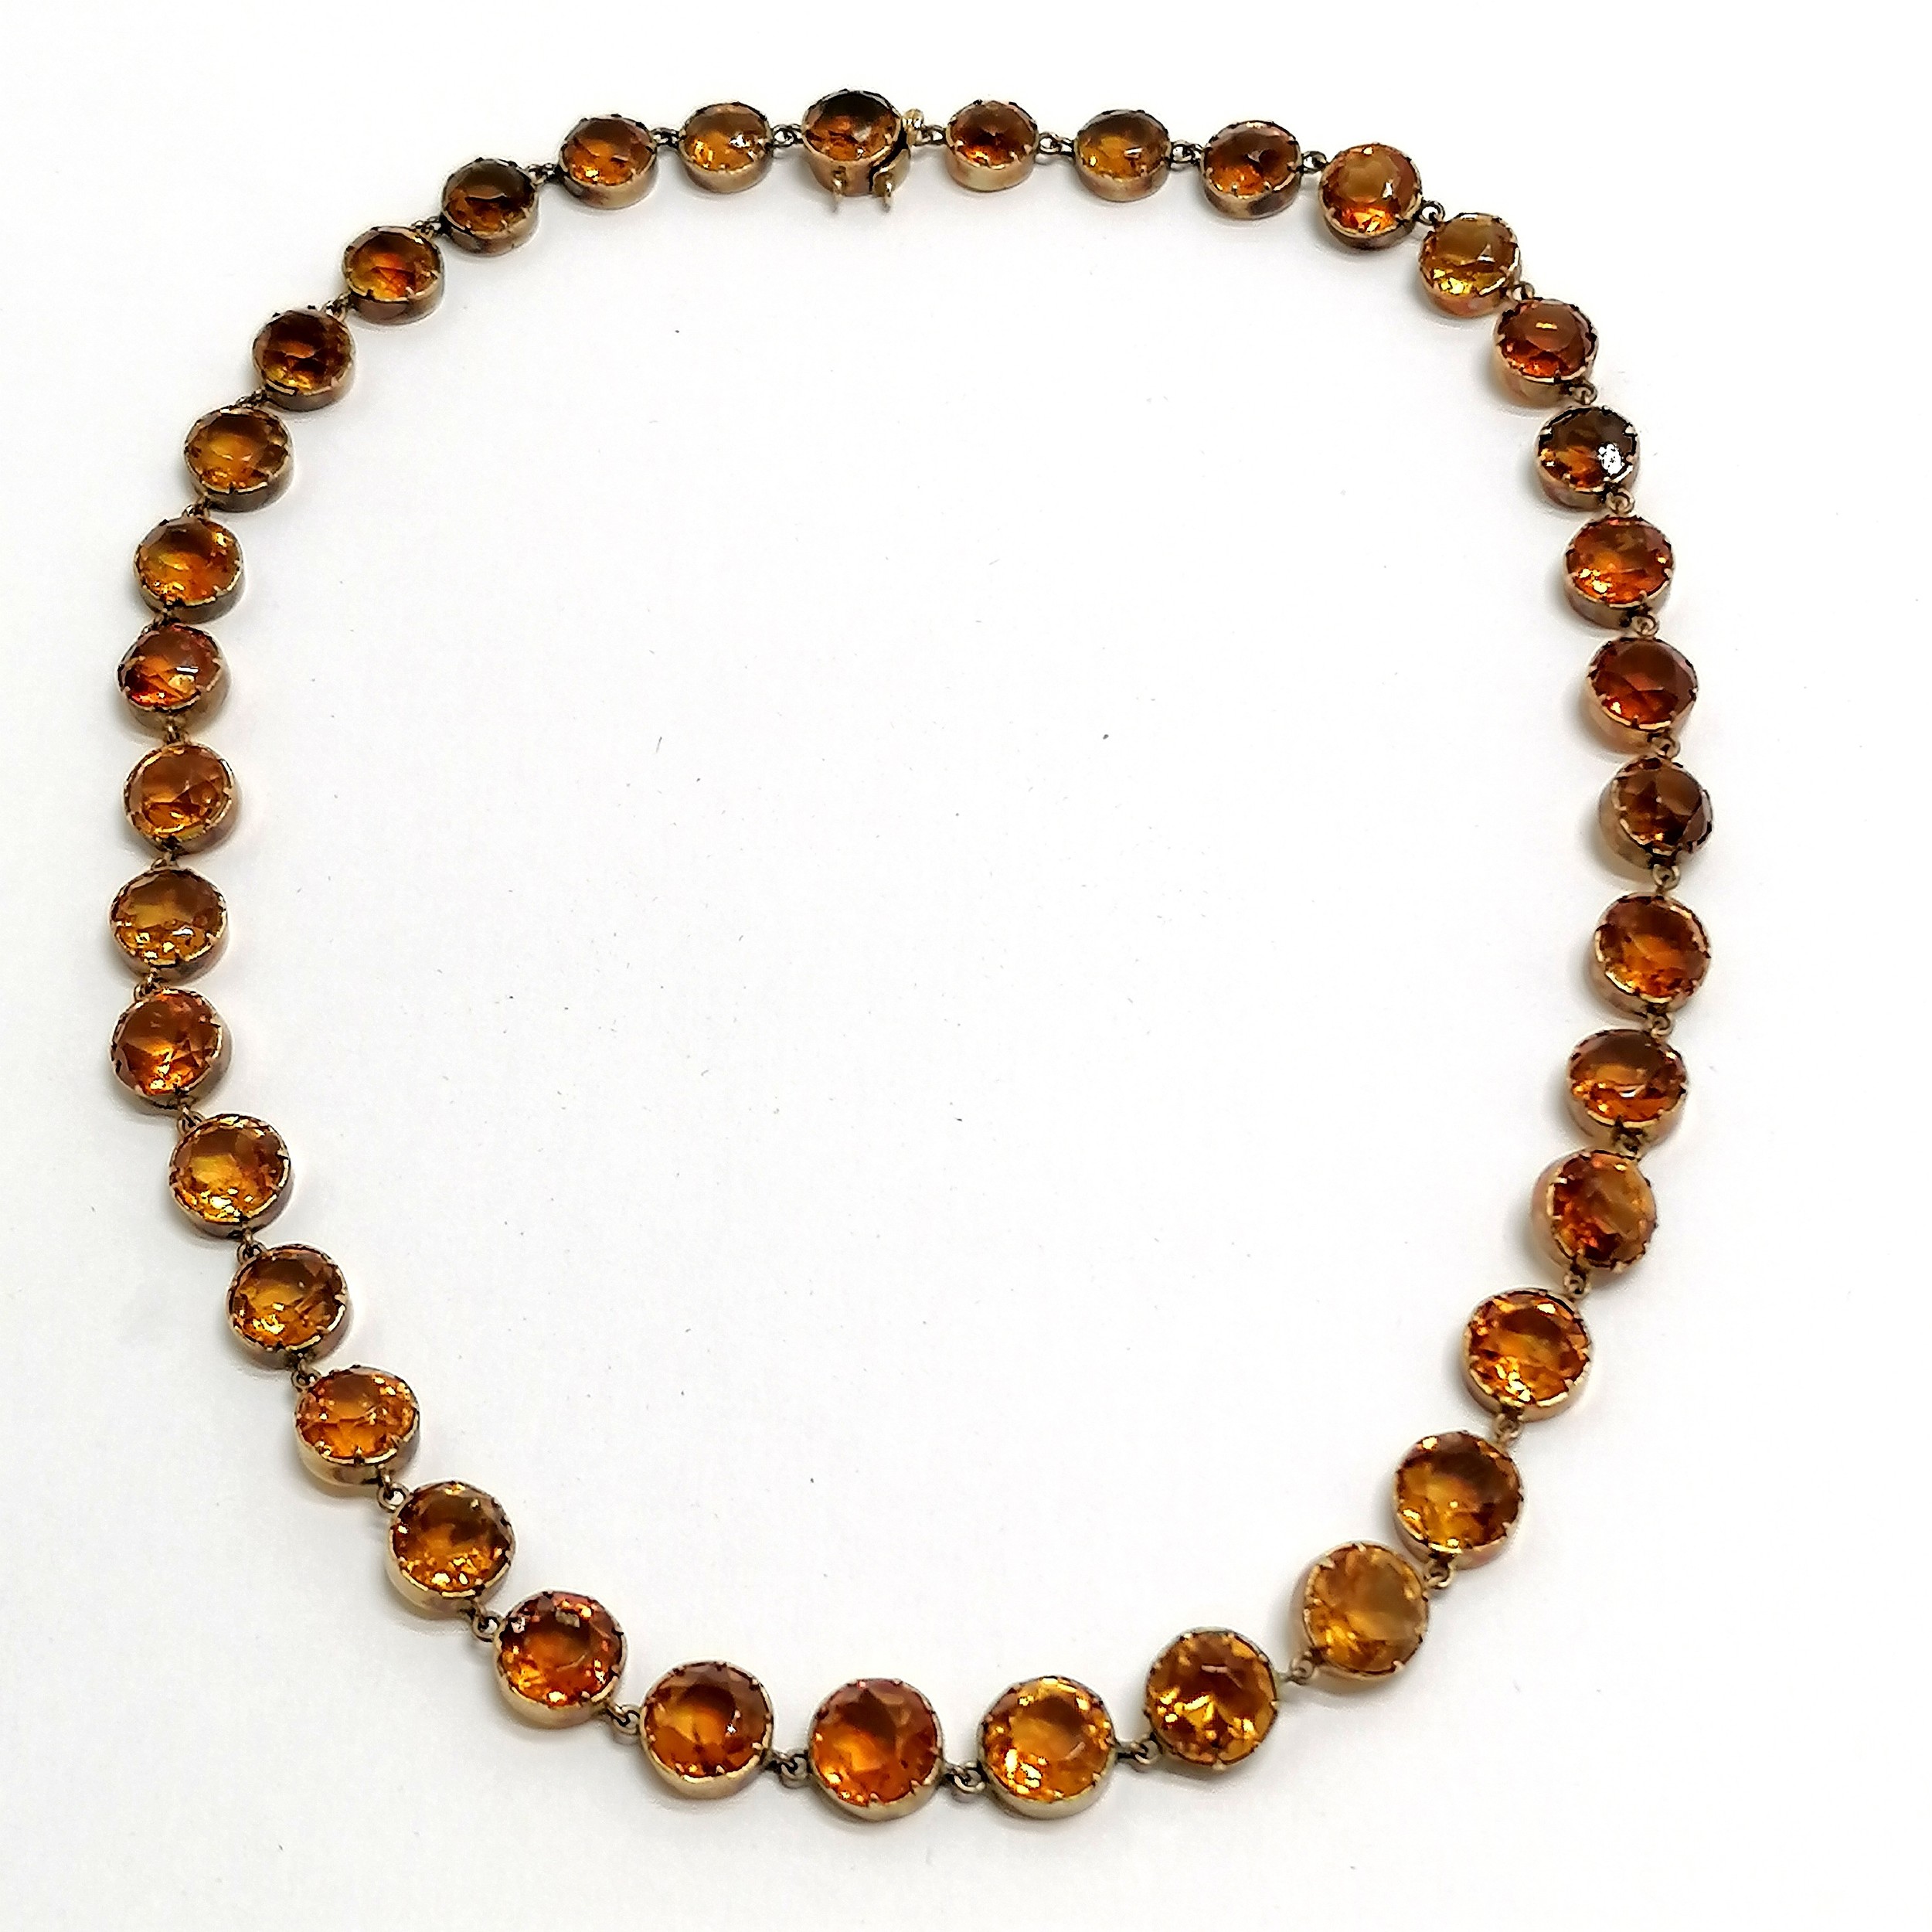 Antique unmarked rose gold citrine stone set necklace - 38cm & 20.5g total weight ~ no obvious - Image 3 of 3